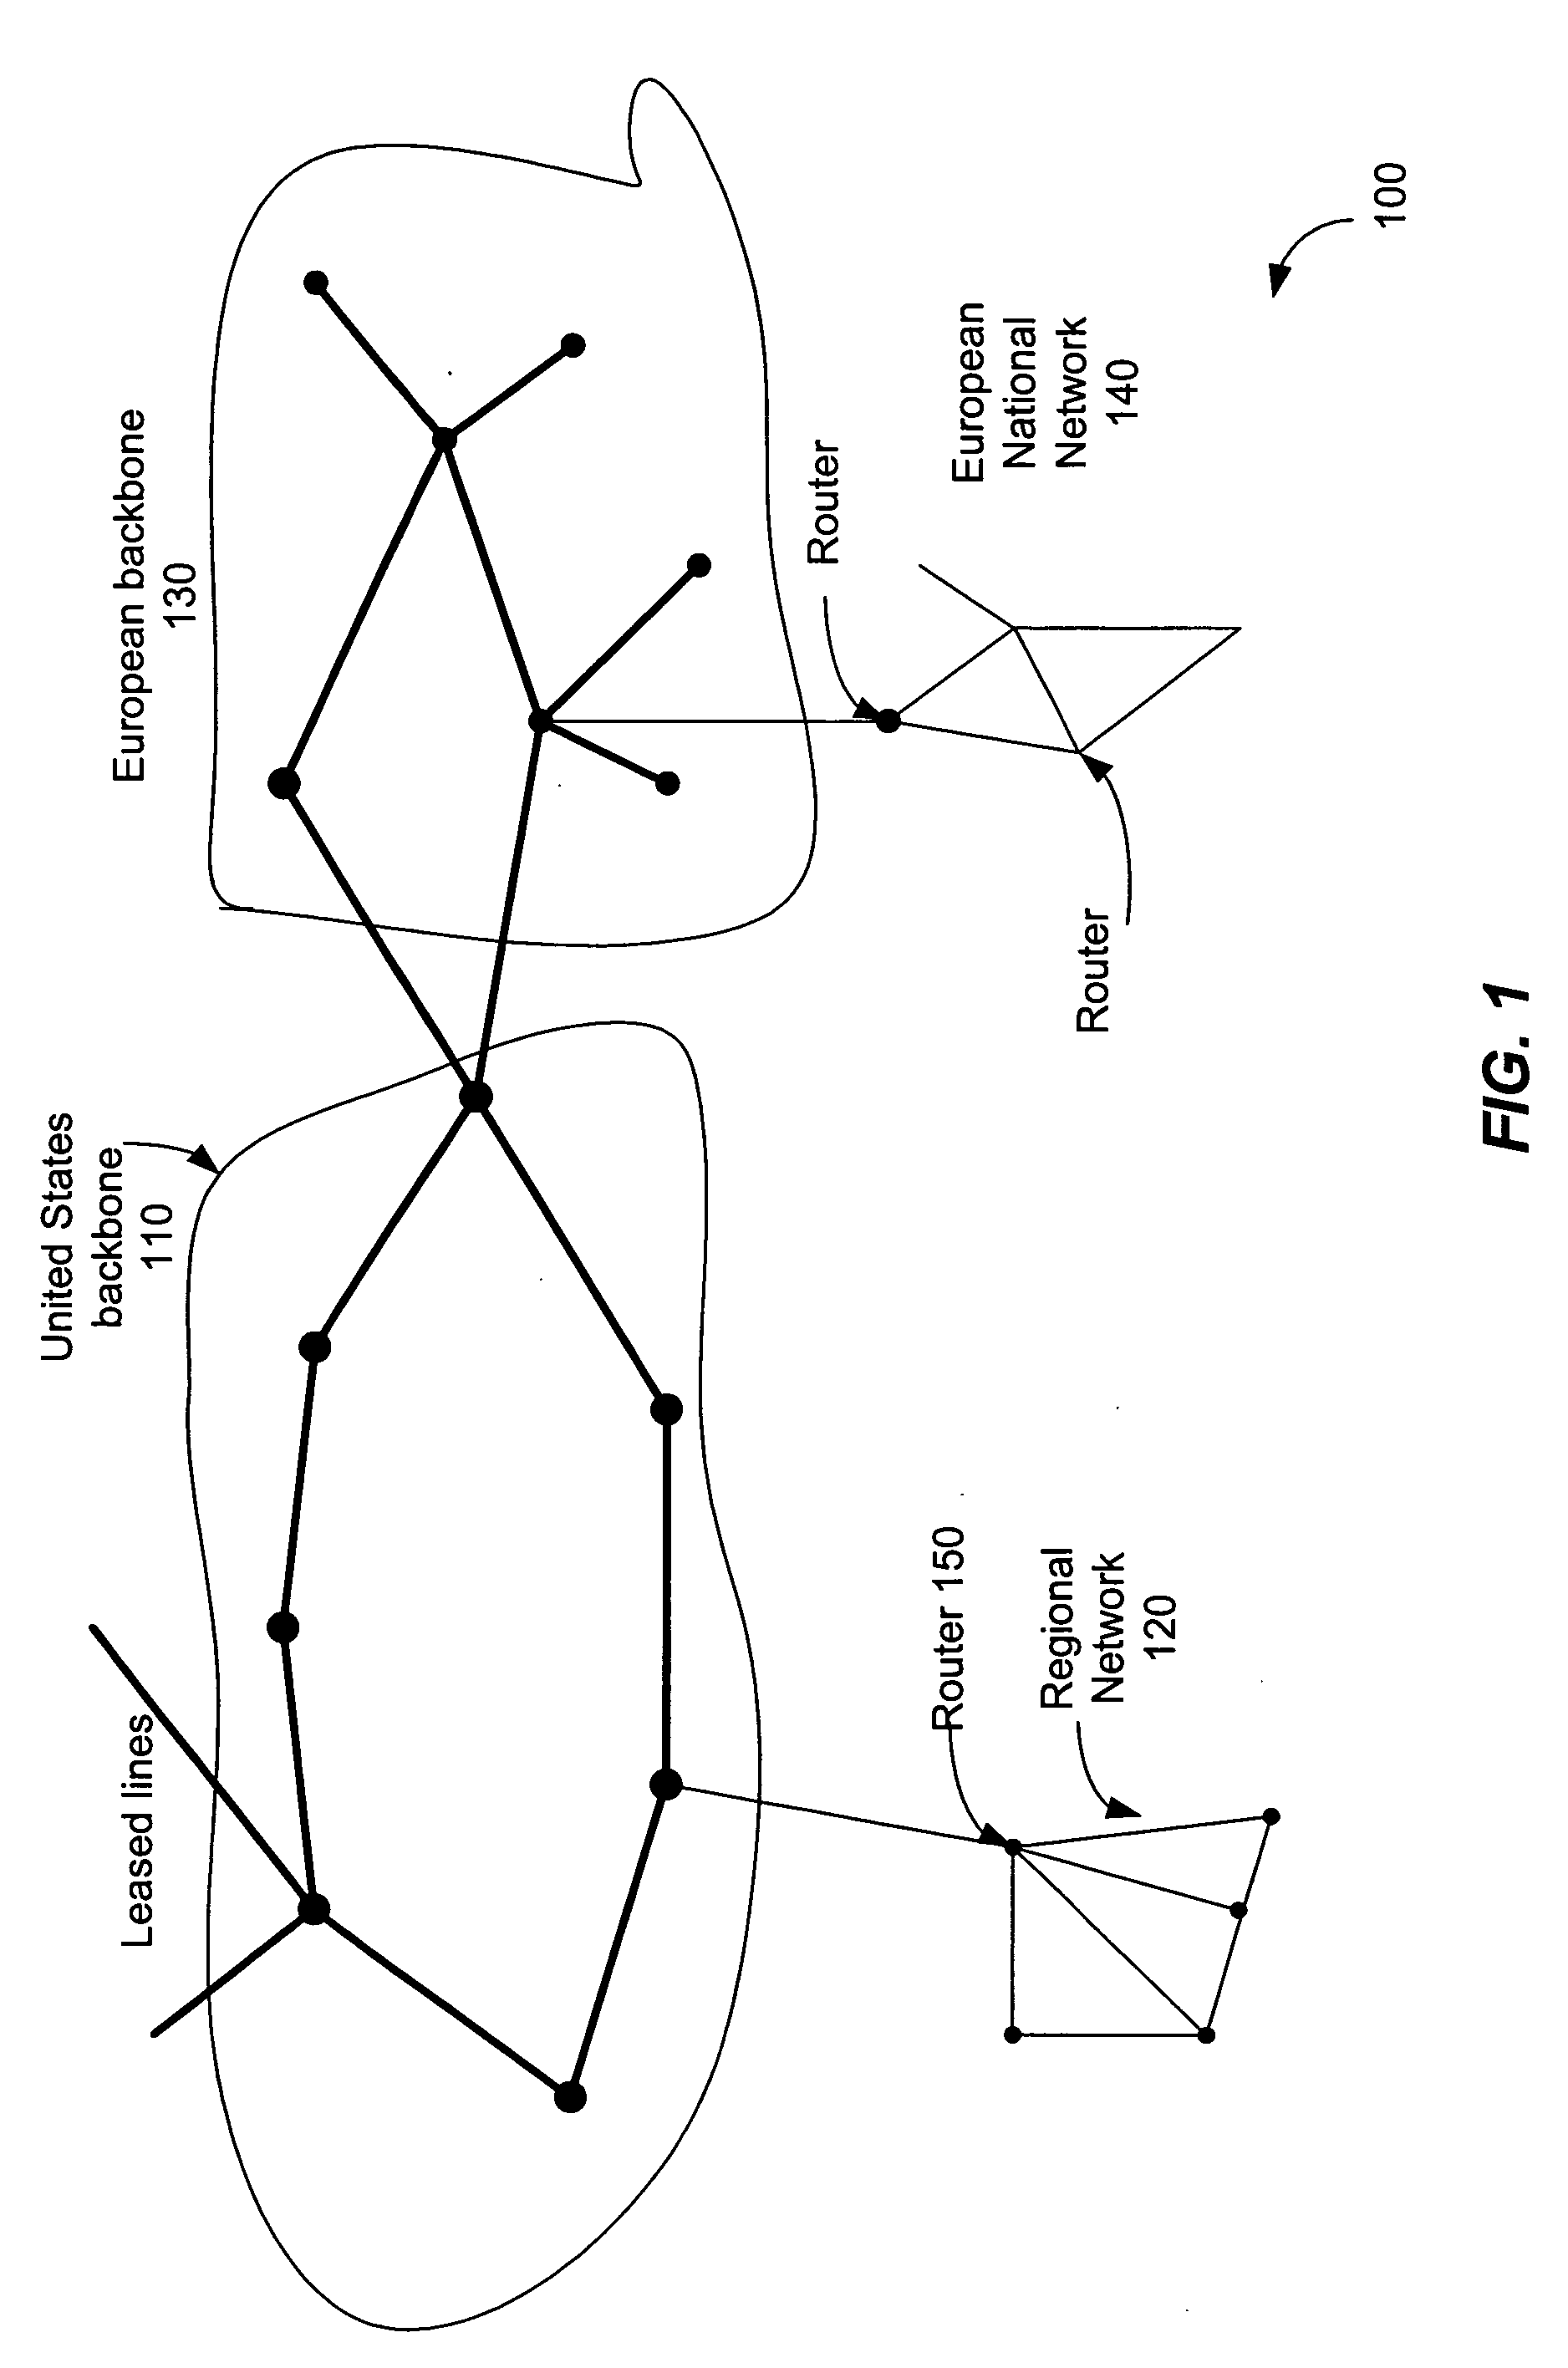 Mesh with protection channel access (MPCA)